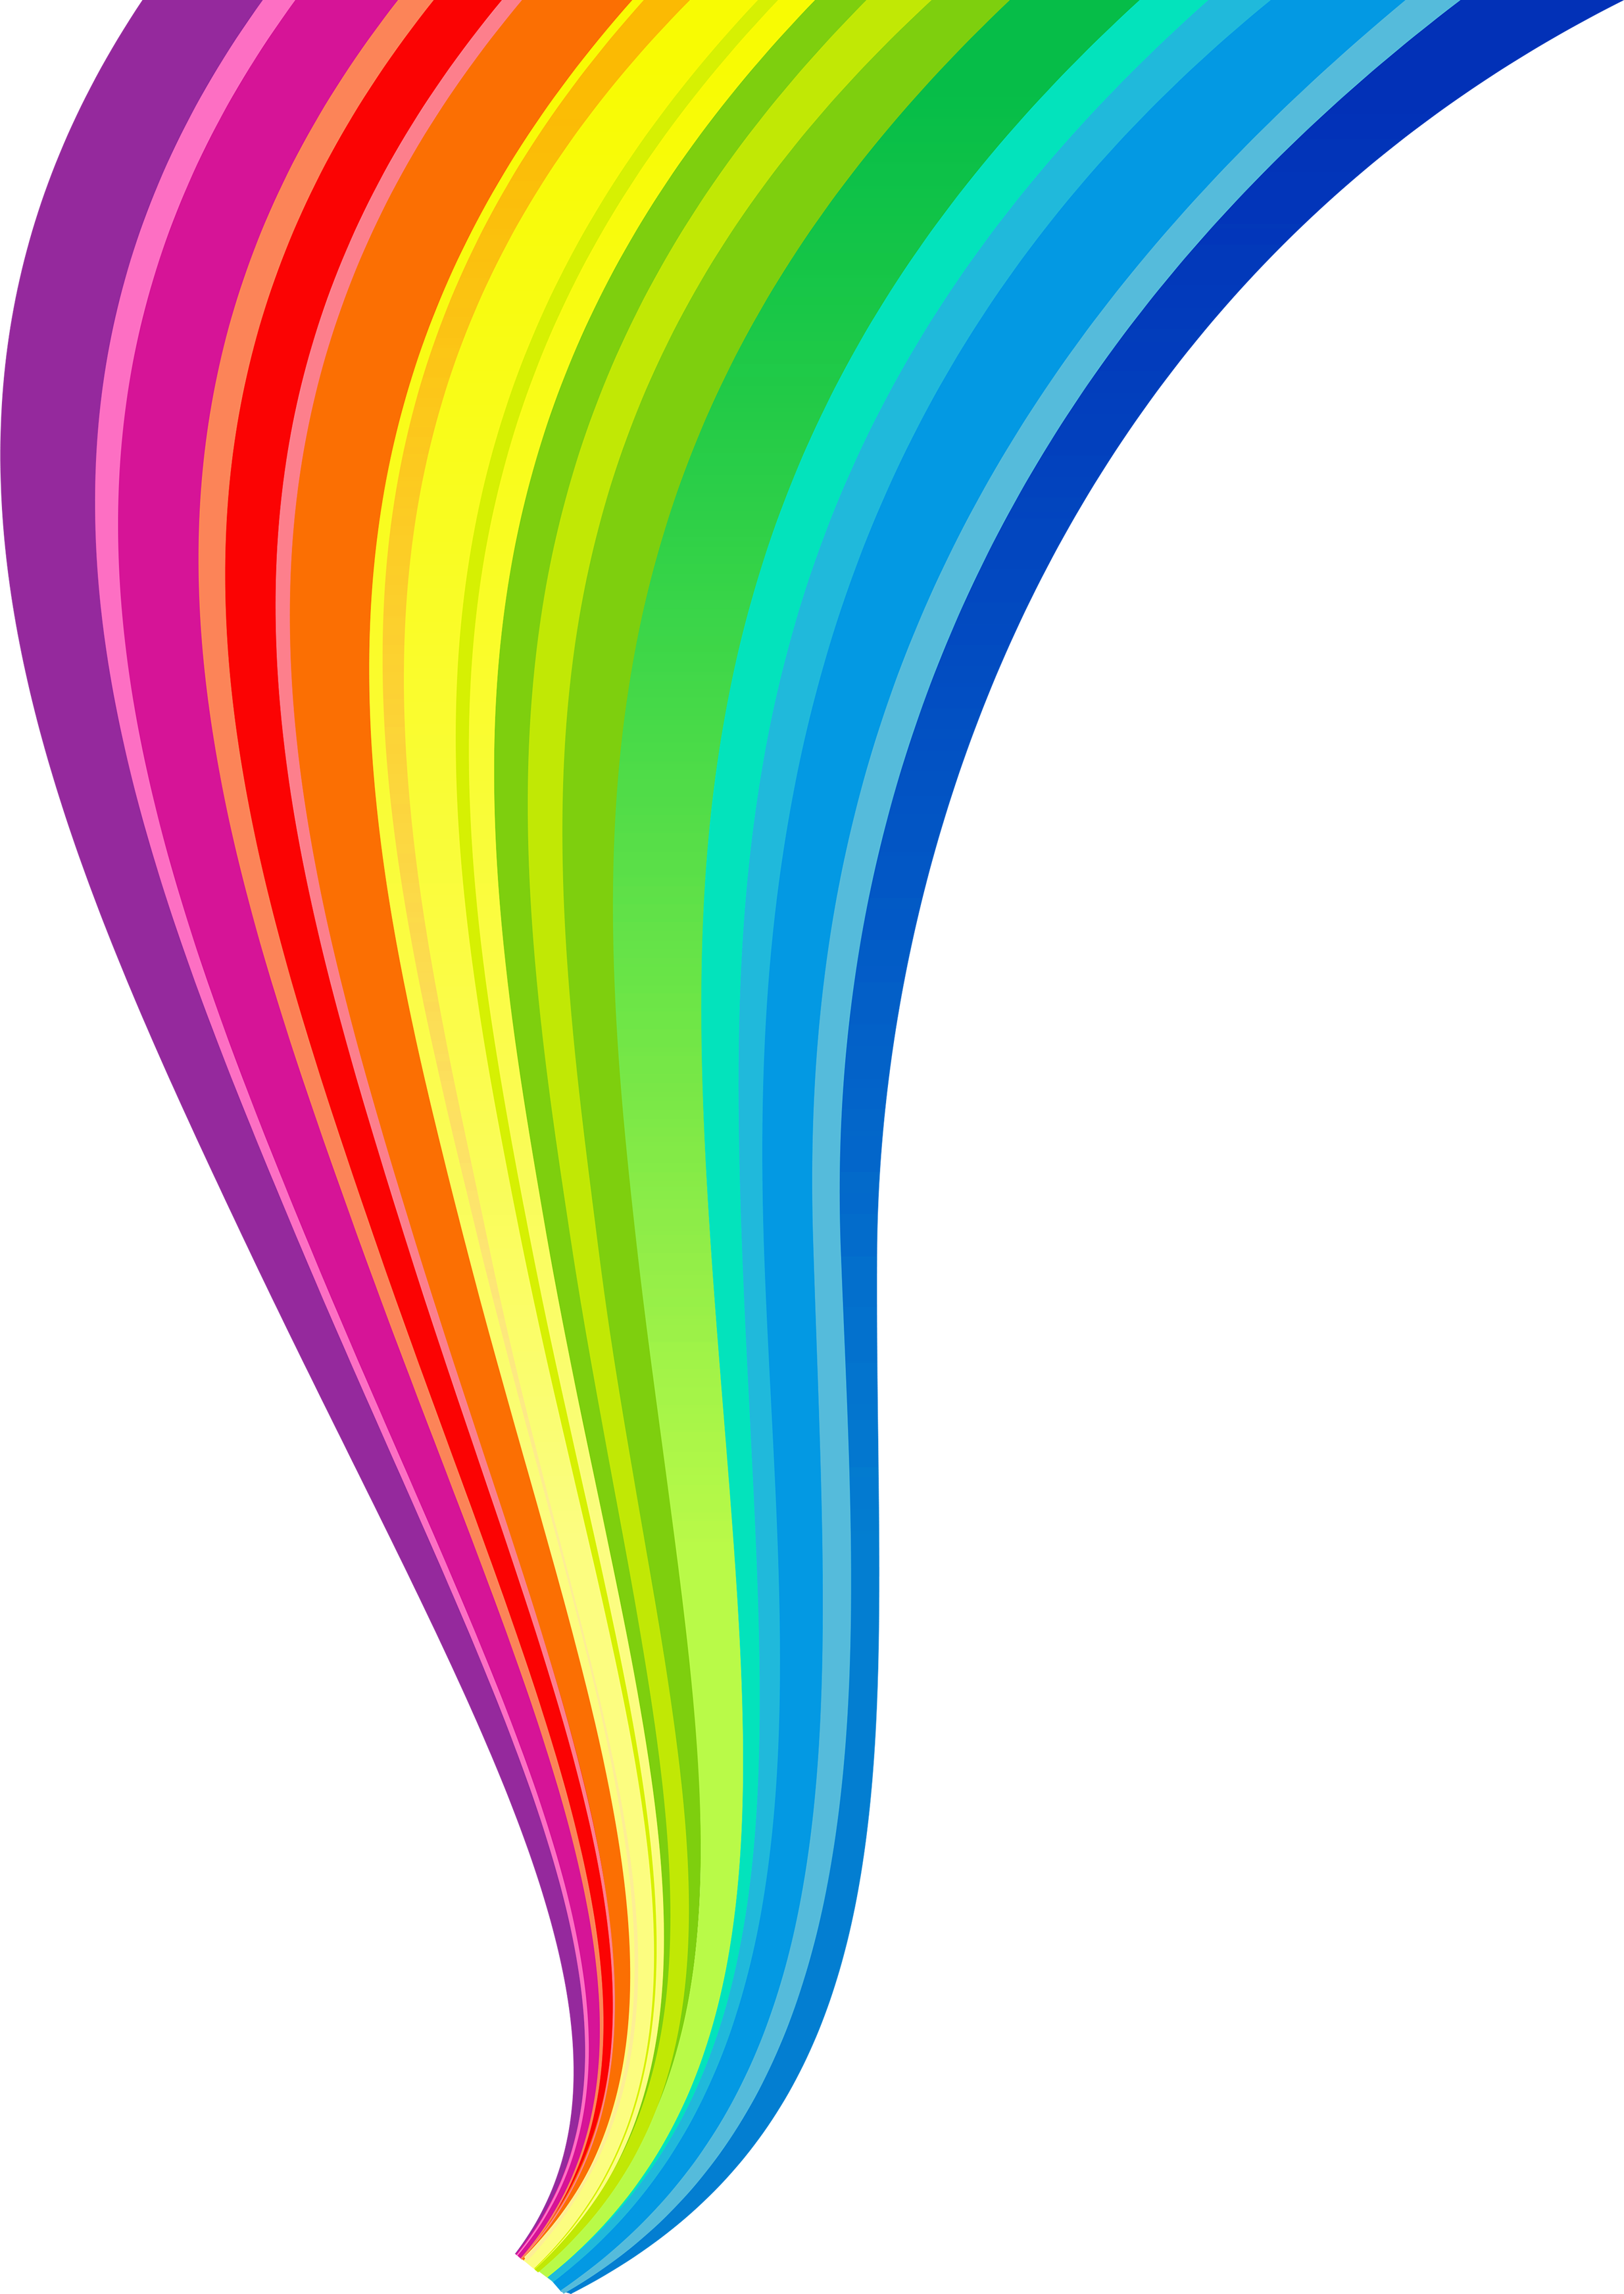 Rainbow PNG images free download | Halloween Costume Ideas ...